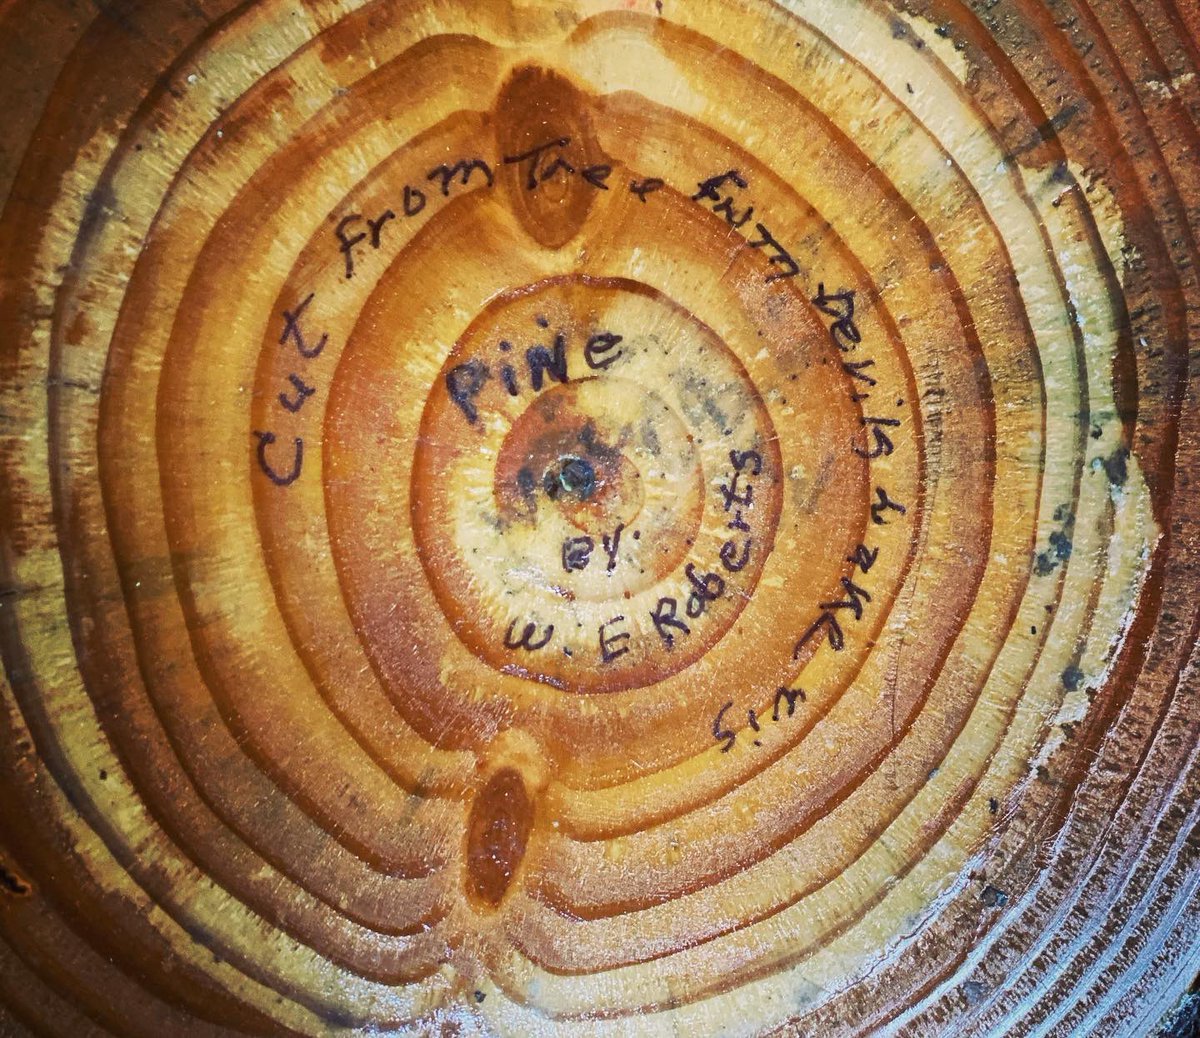 Or, here: my grandfather made this from a tree he gathered when I was a child. Days ago, I retrieved it (and other such items) from storage, and have been picking it up, marveling at its beauty. He honed it, varnished it, made it useful and made it beautiful. And signed his name.